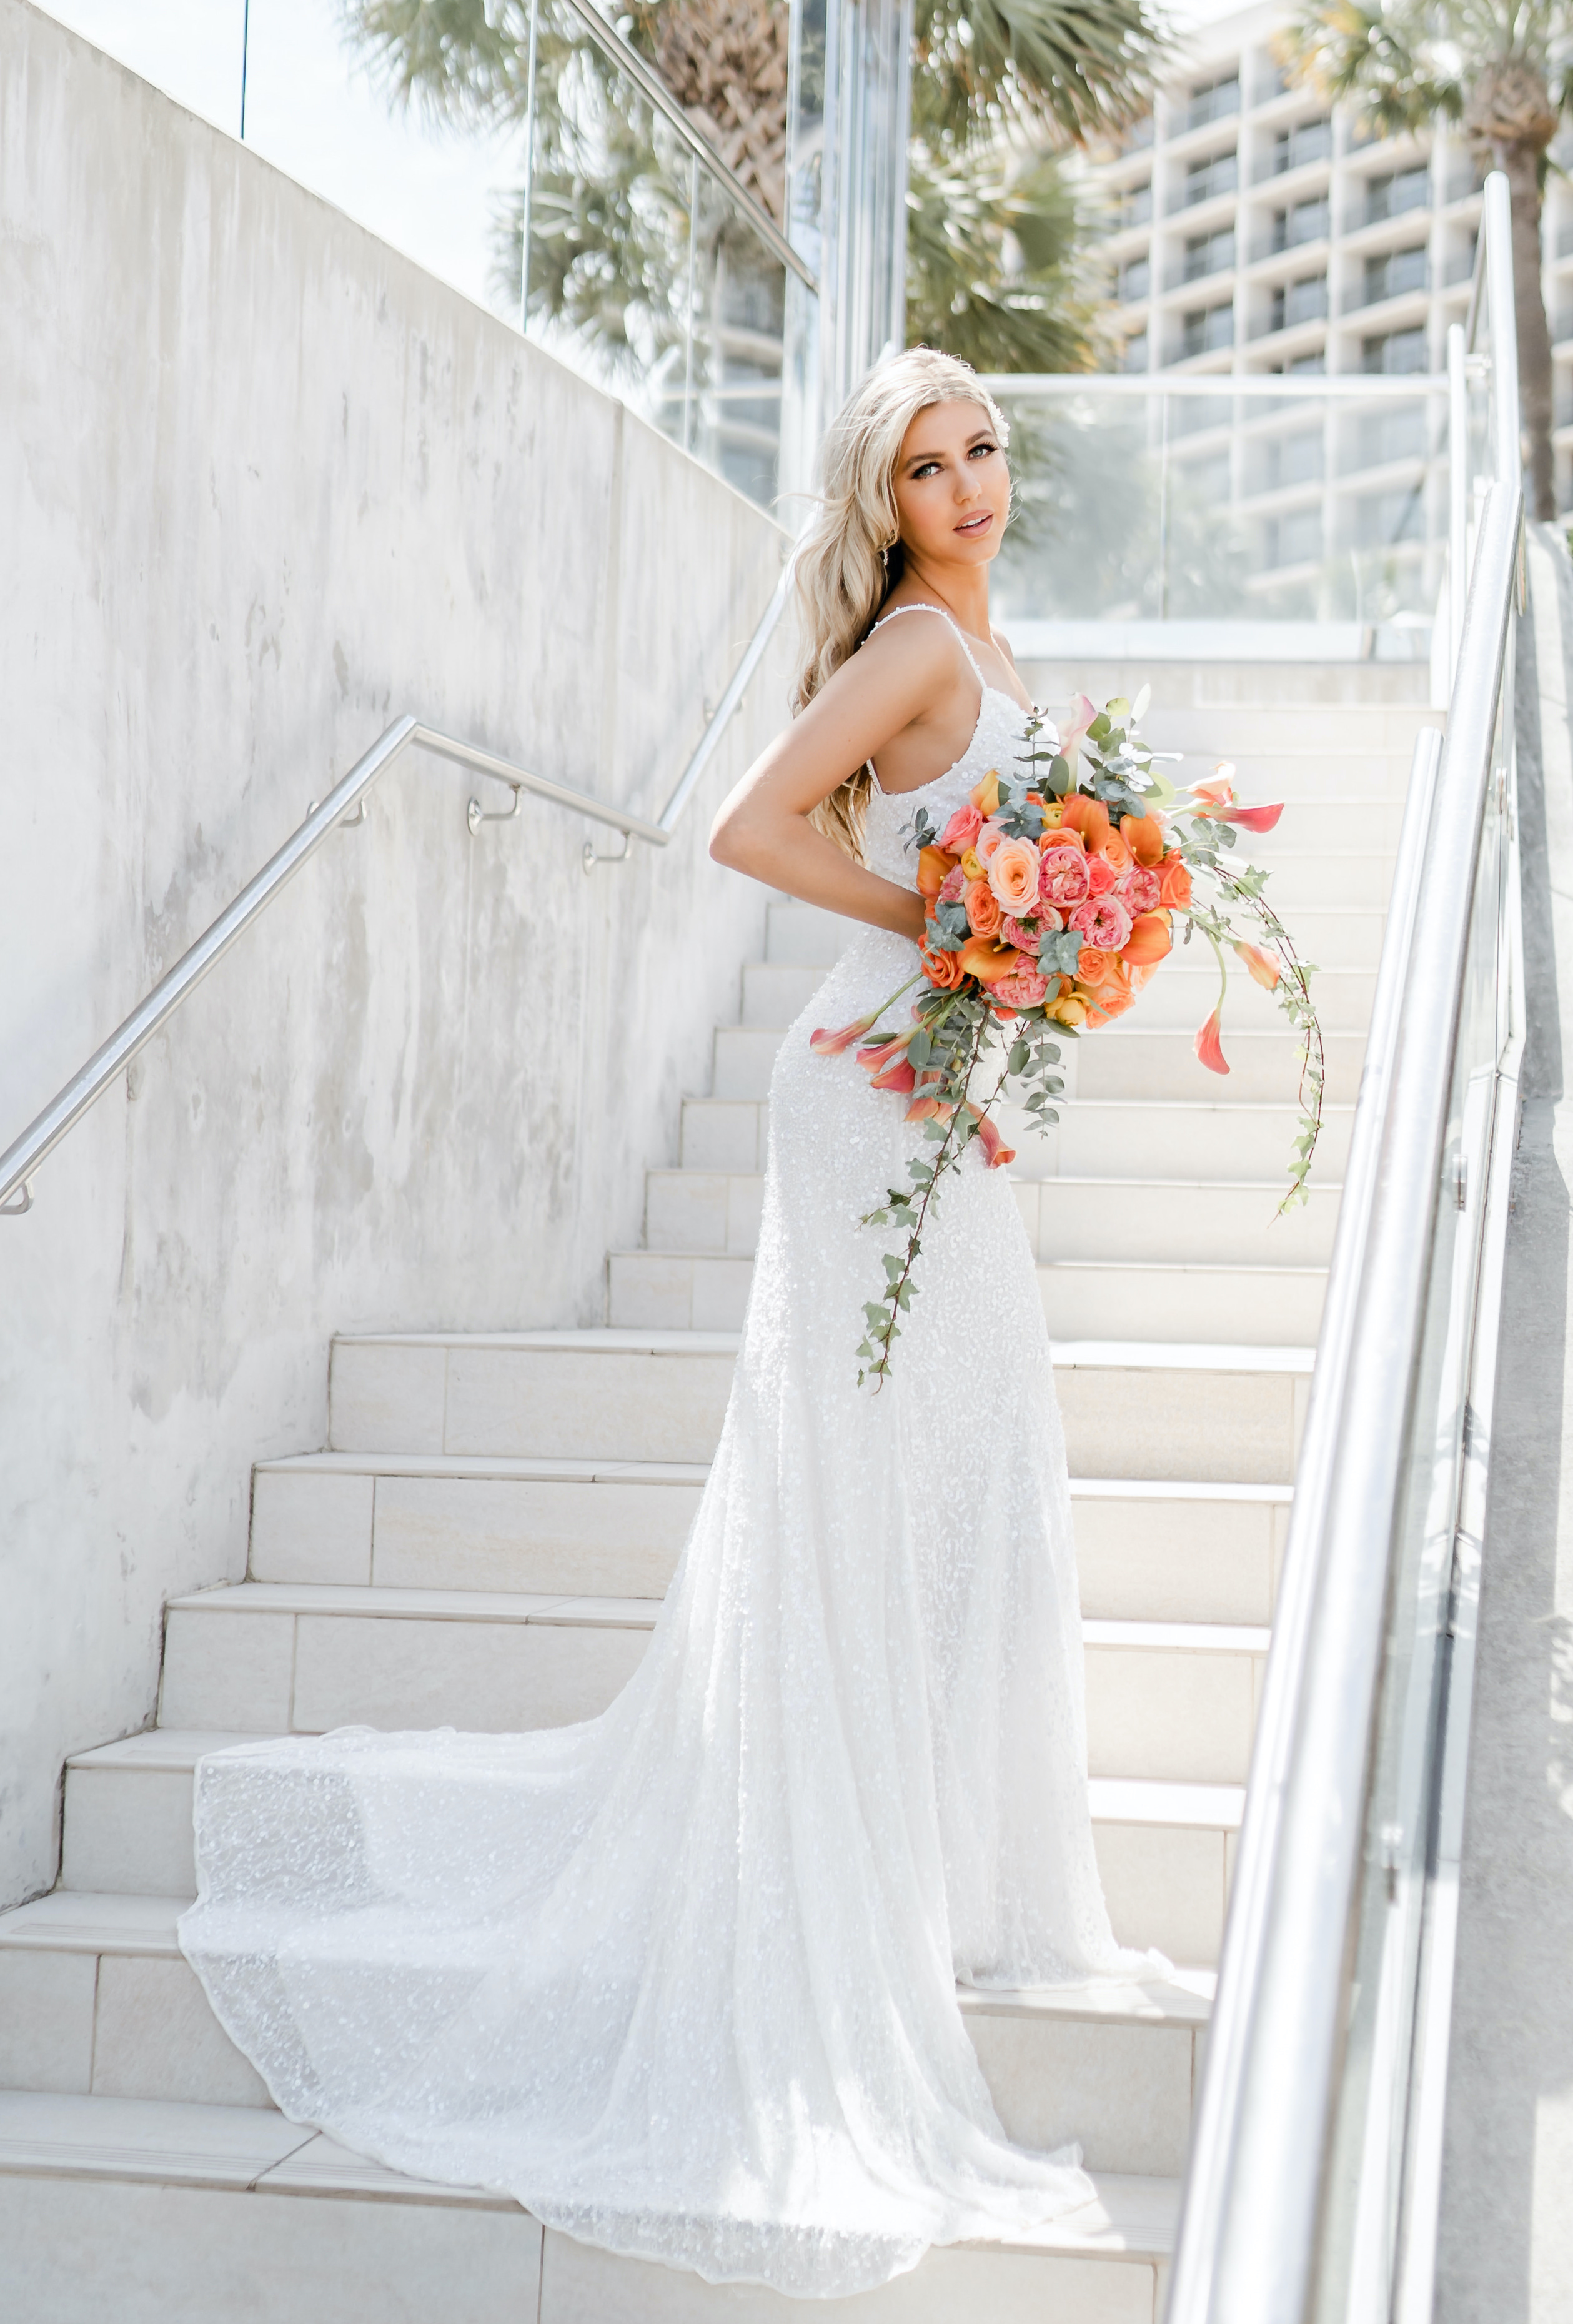 A bride poses on an outdoor stairwell with a bridal bouquet of vibrant orange and pink flowers for a tropical luxe beachfront wedding editorial at The San Luis Resort, Spa & Conference Center in Galveston.